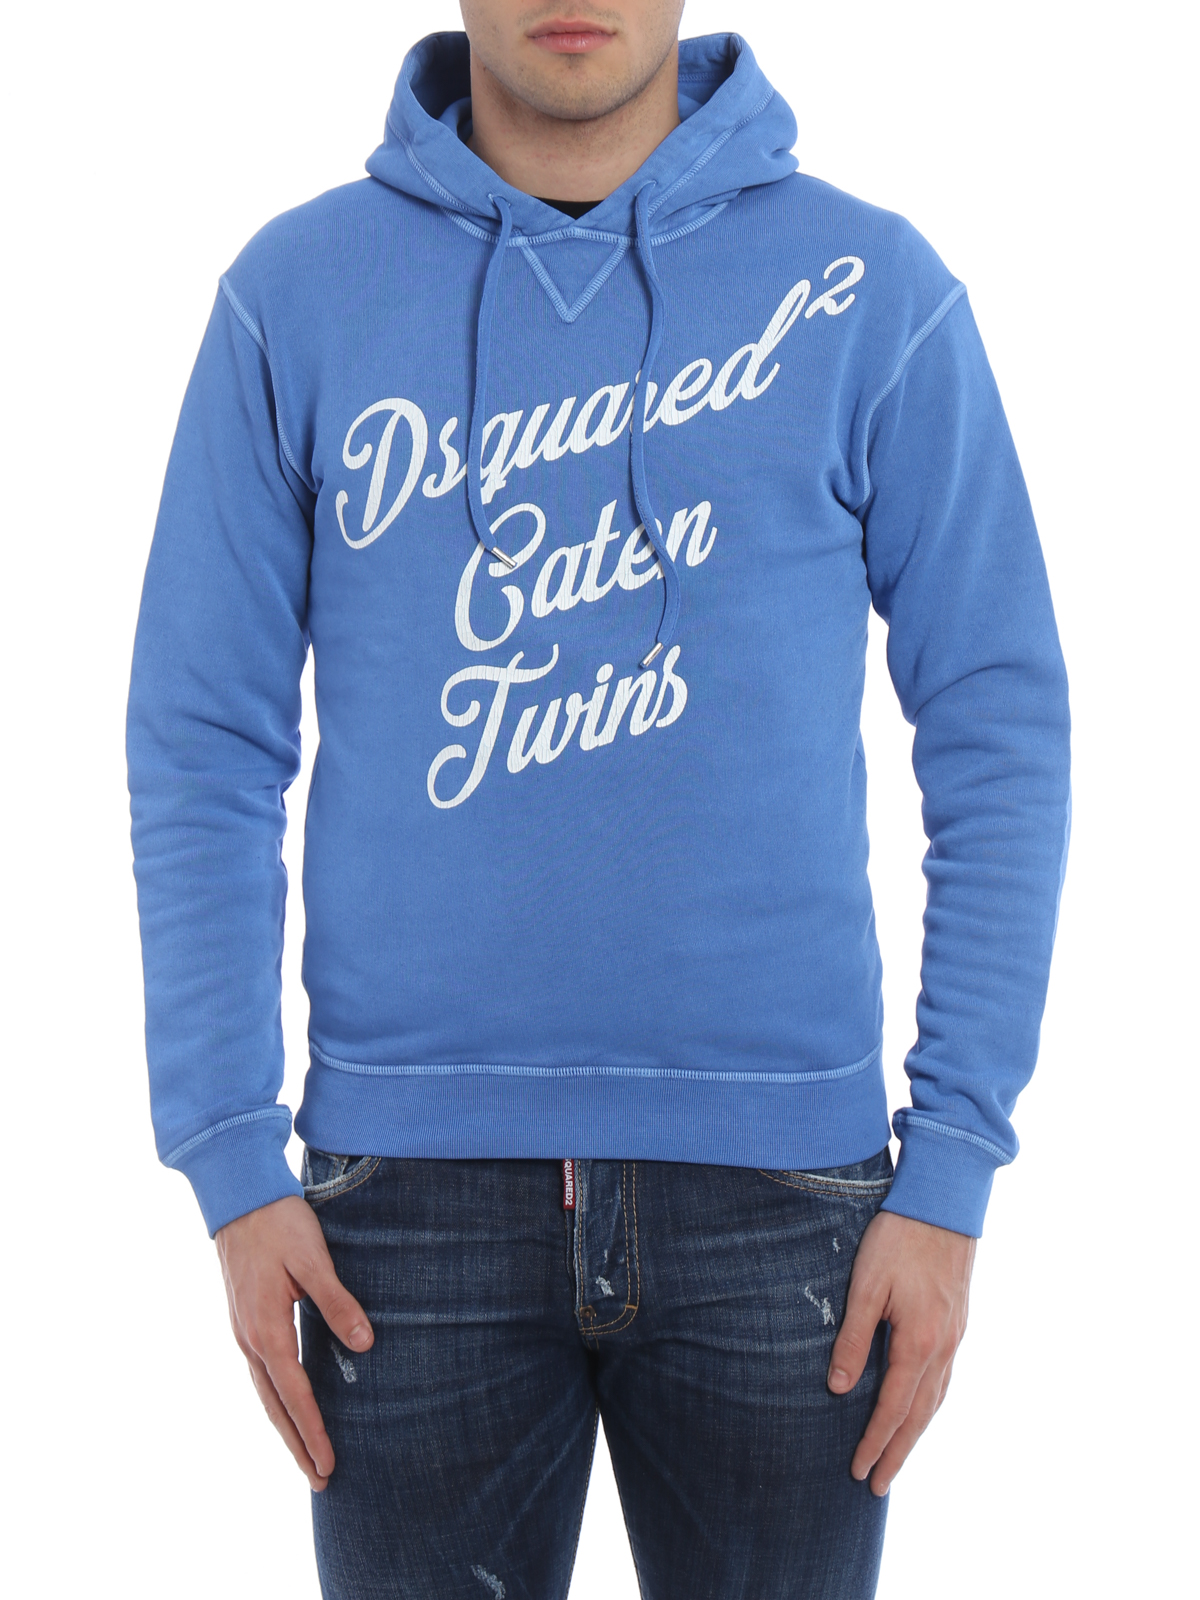 Dsquared2 - Caten Twins hoodie 